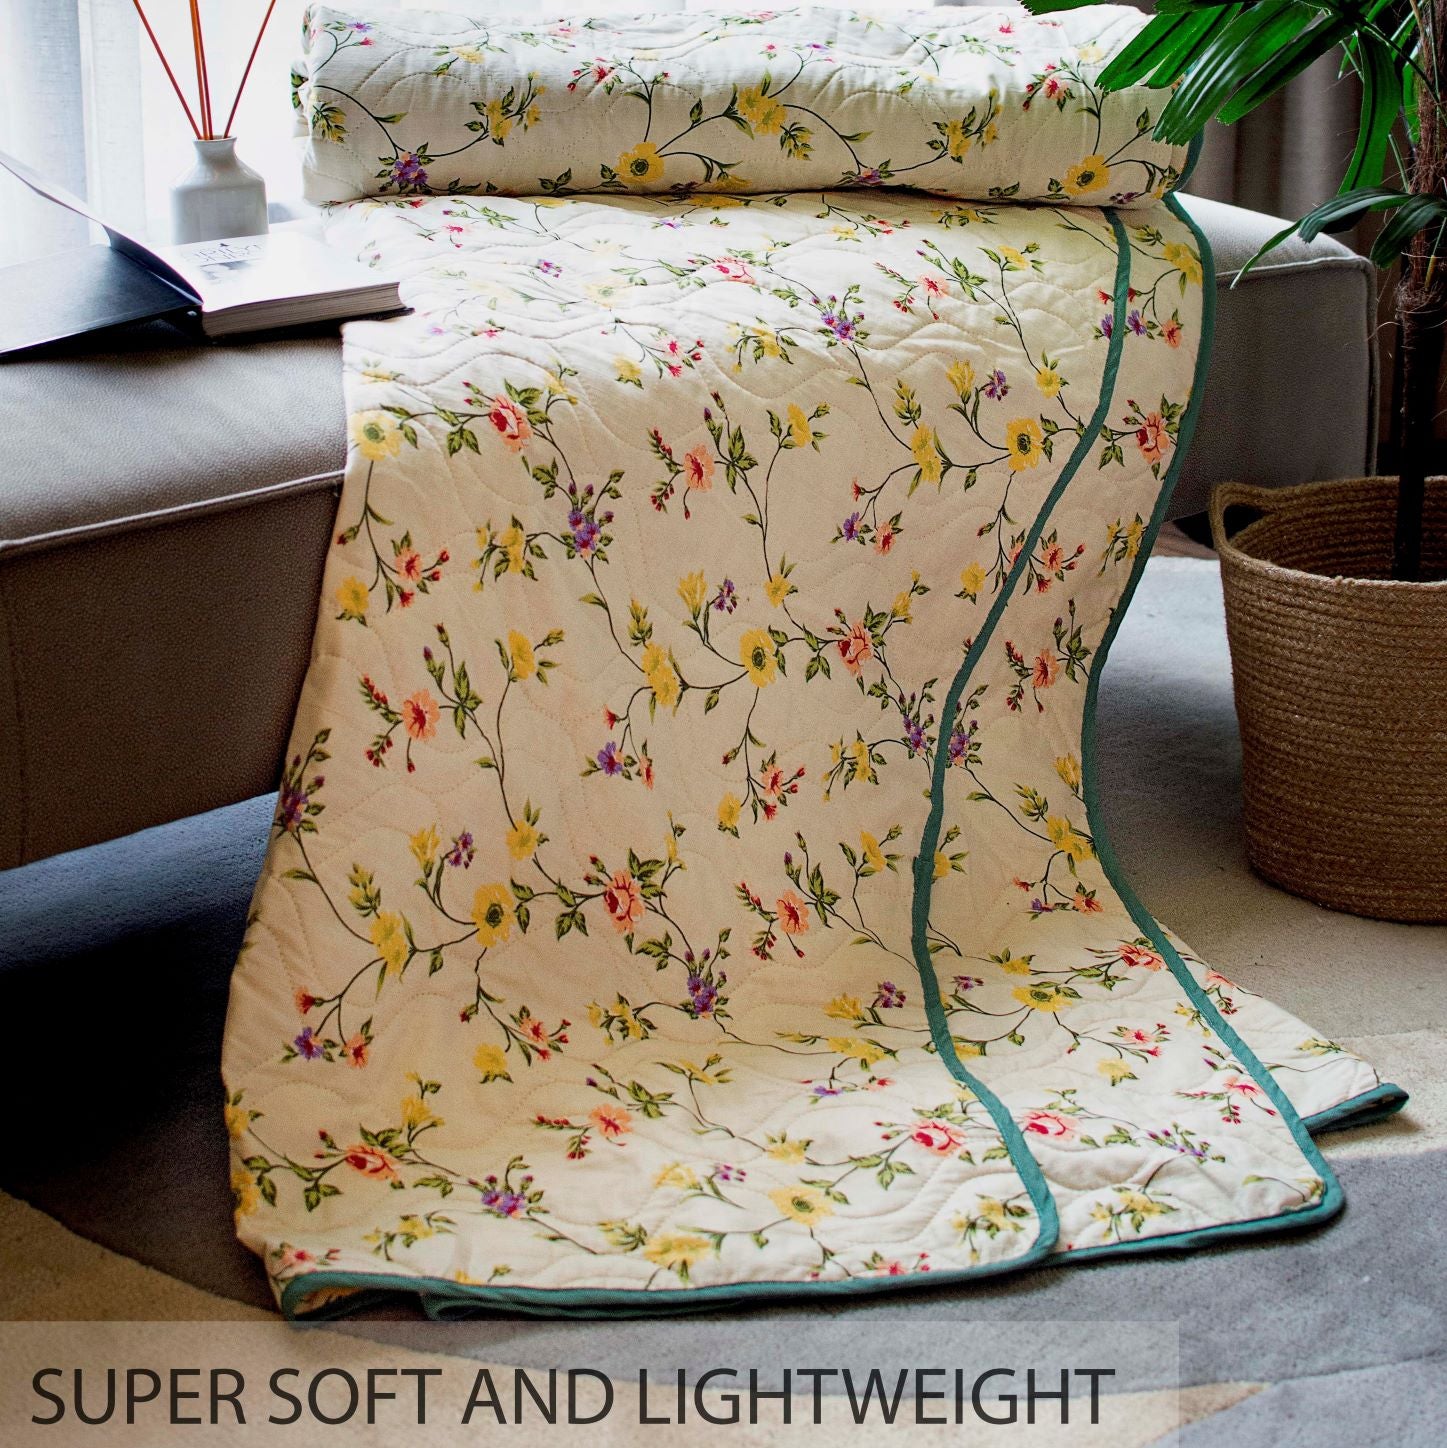 100% Cotton Malmal Blanket, Dohar, Comforter / Quilt for AC and Light  Winters - Floral